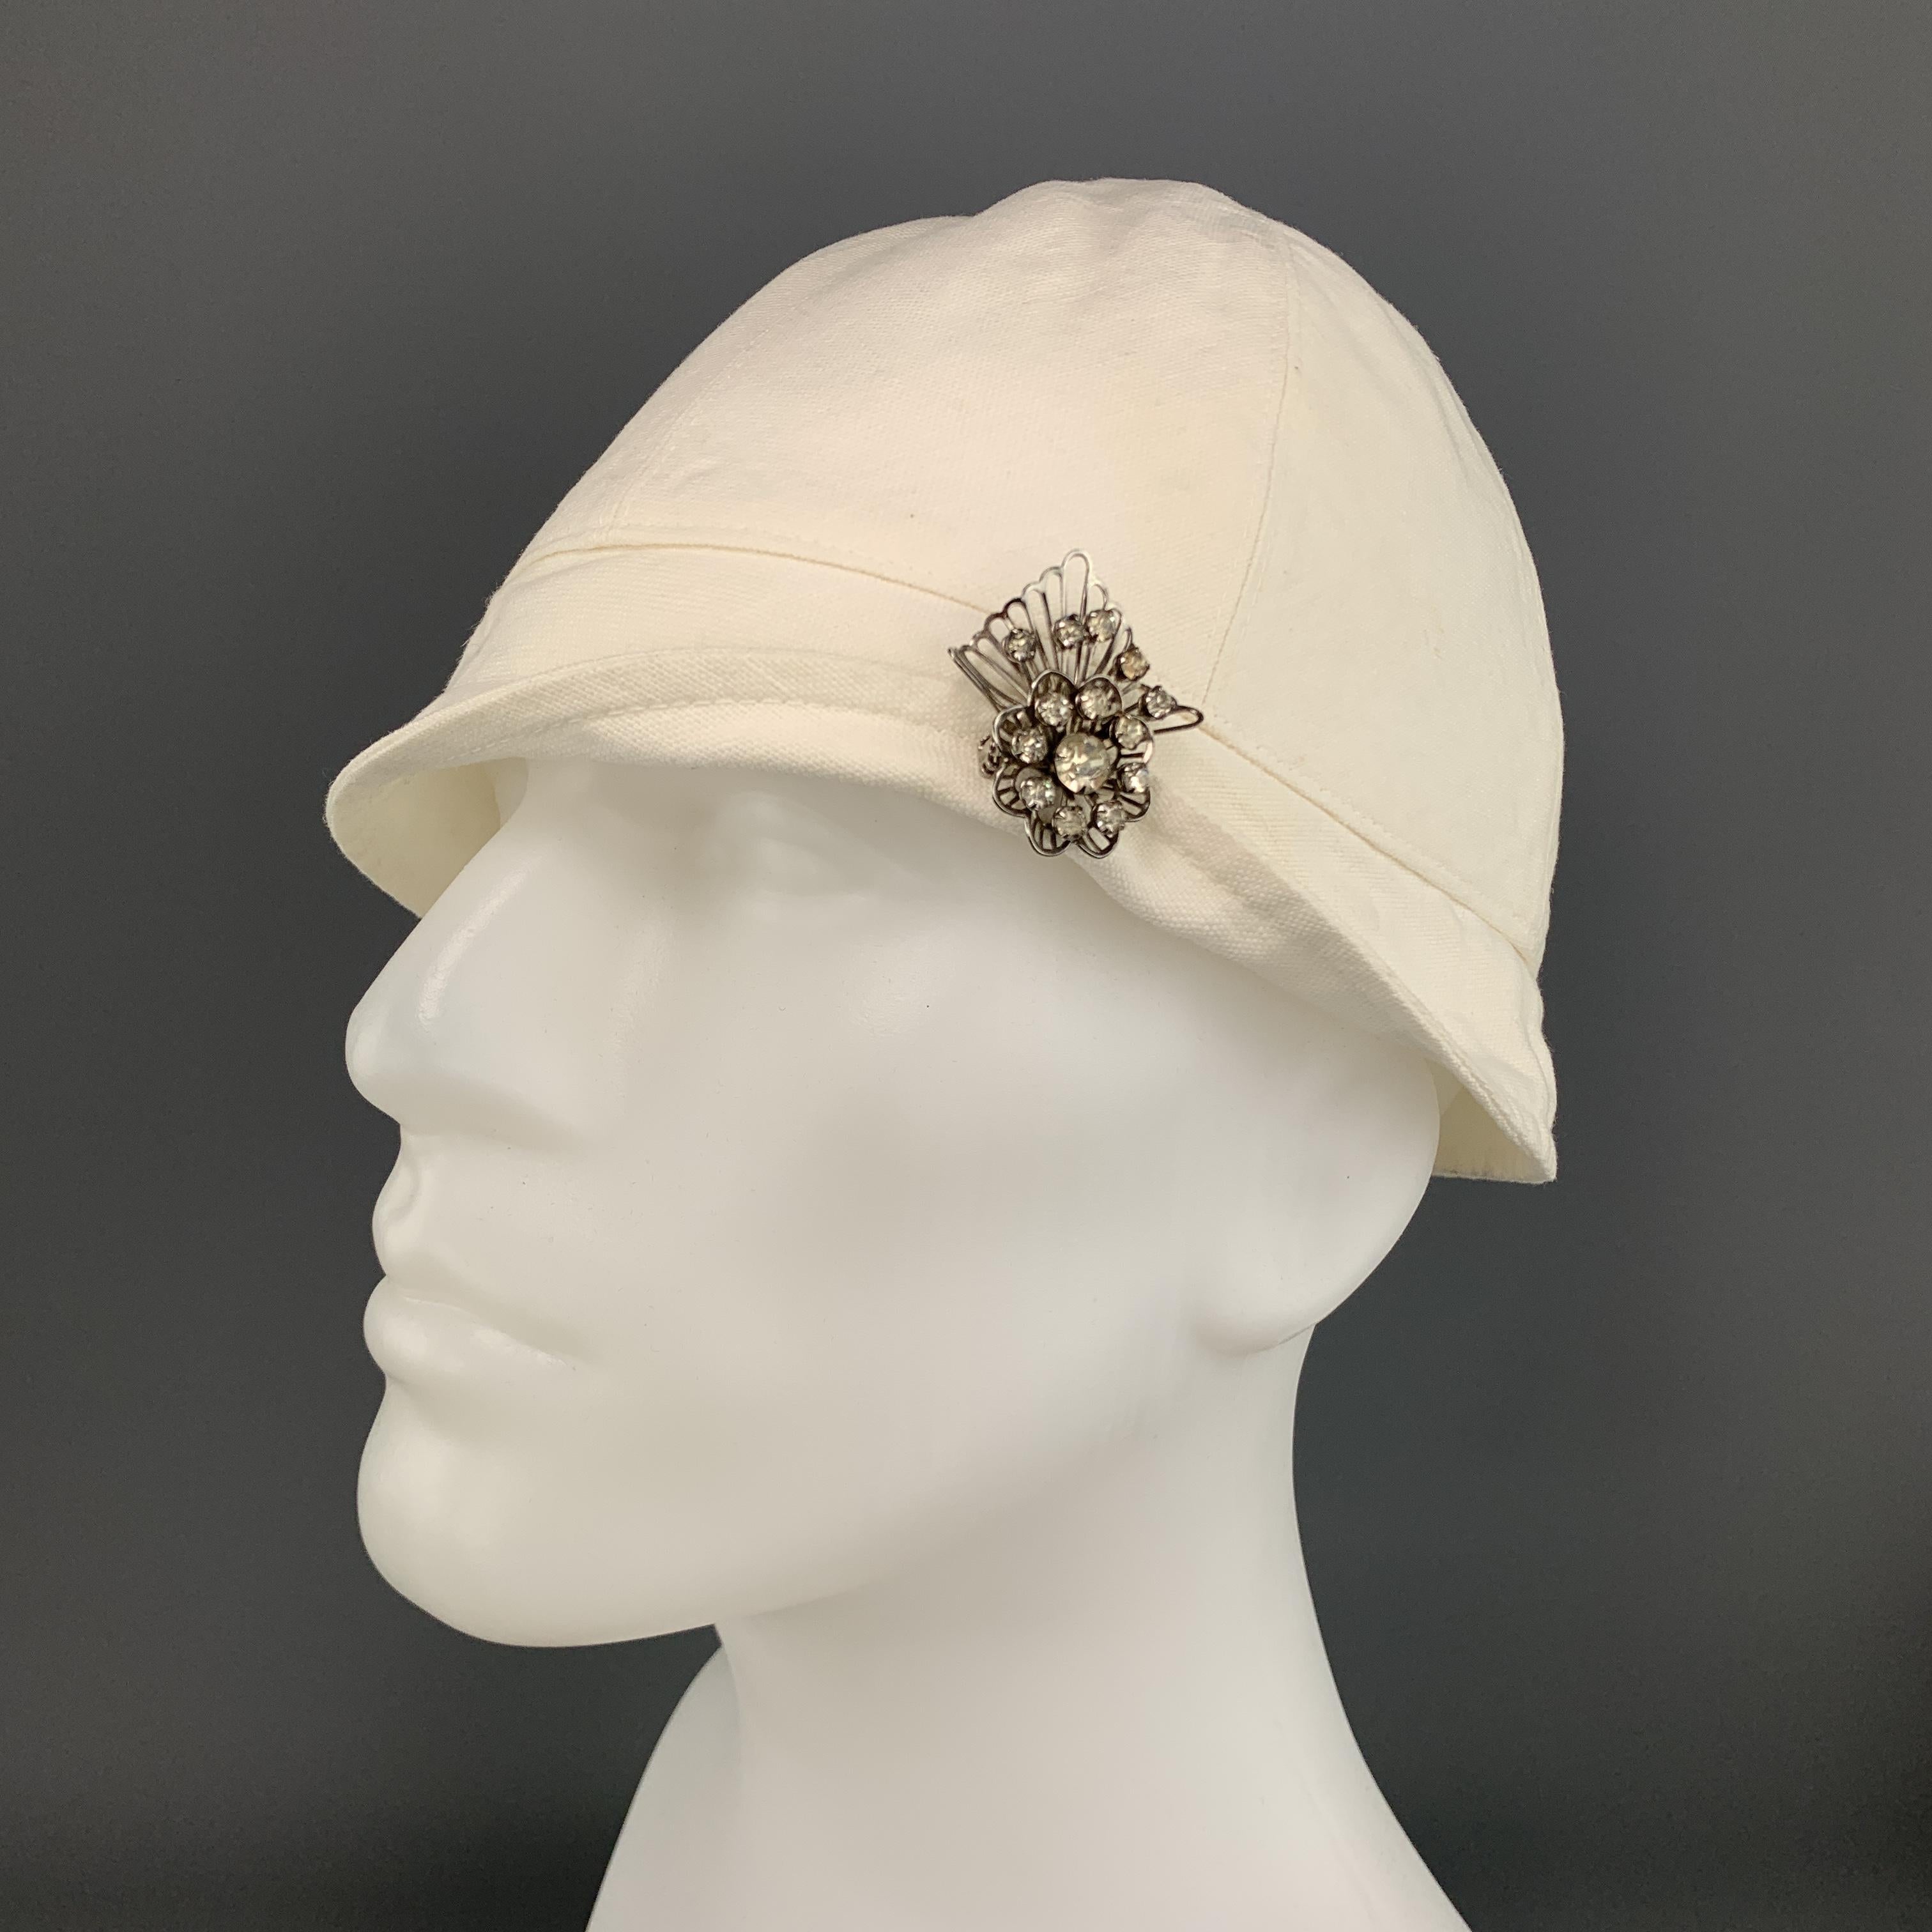 Vintage RALPH LAUREN COLLECTION PATRICIA UNDERWOOD 1920's cap comes in cream canvas with a silver tone rhinestone brooch.

Excellent Pre-Owned Condition.

Measurements:

Opening: 23 in.
Brim: 1.5 in.
Height: 6 in.